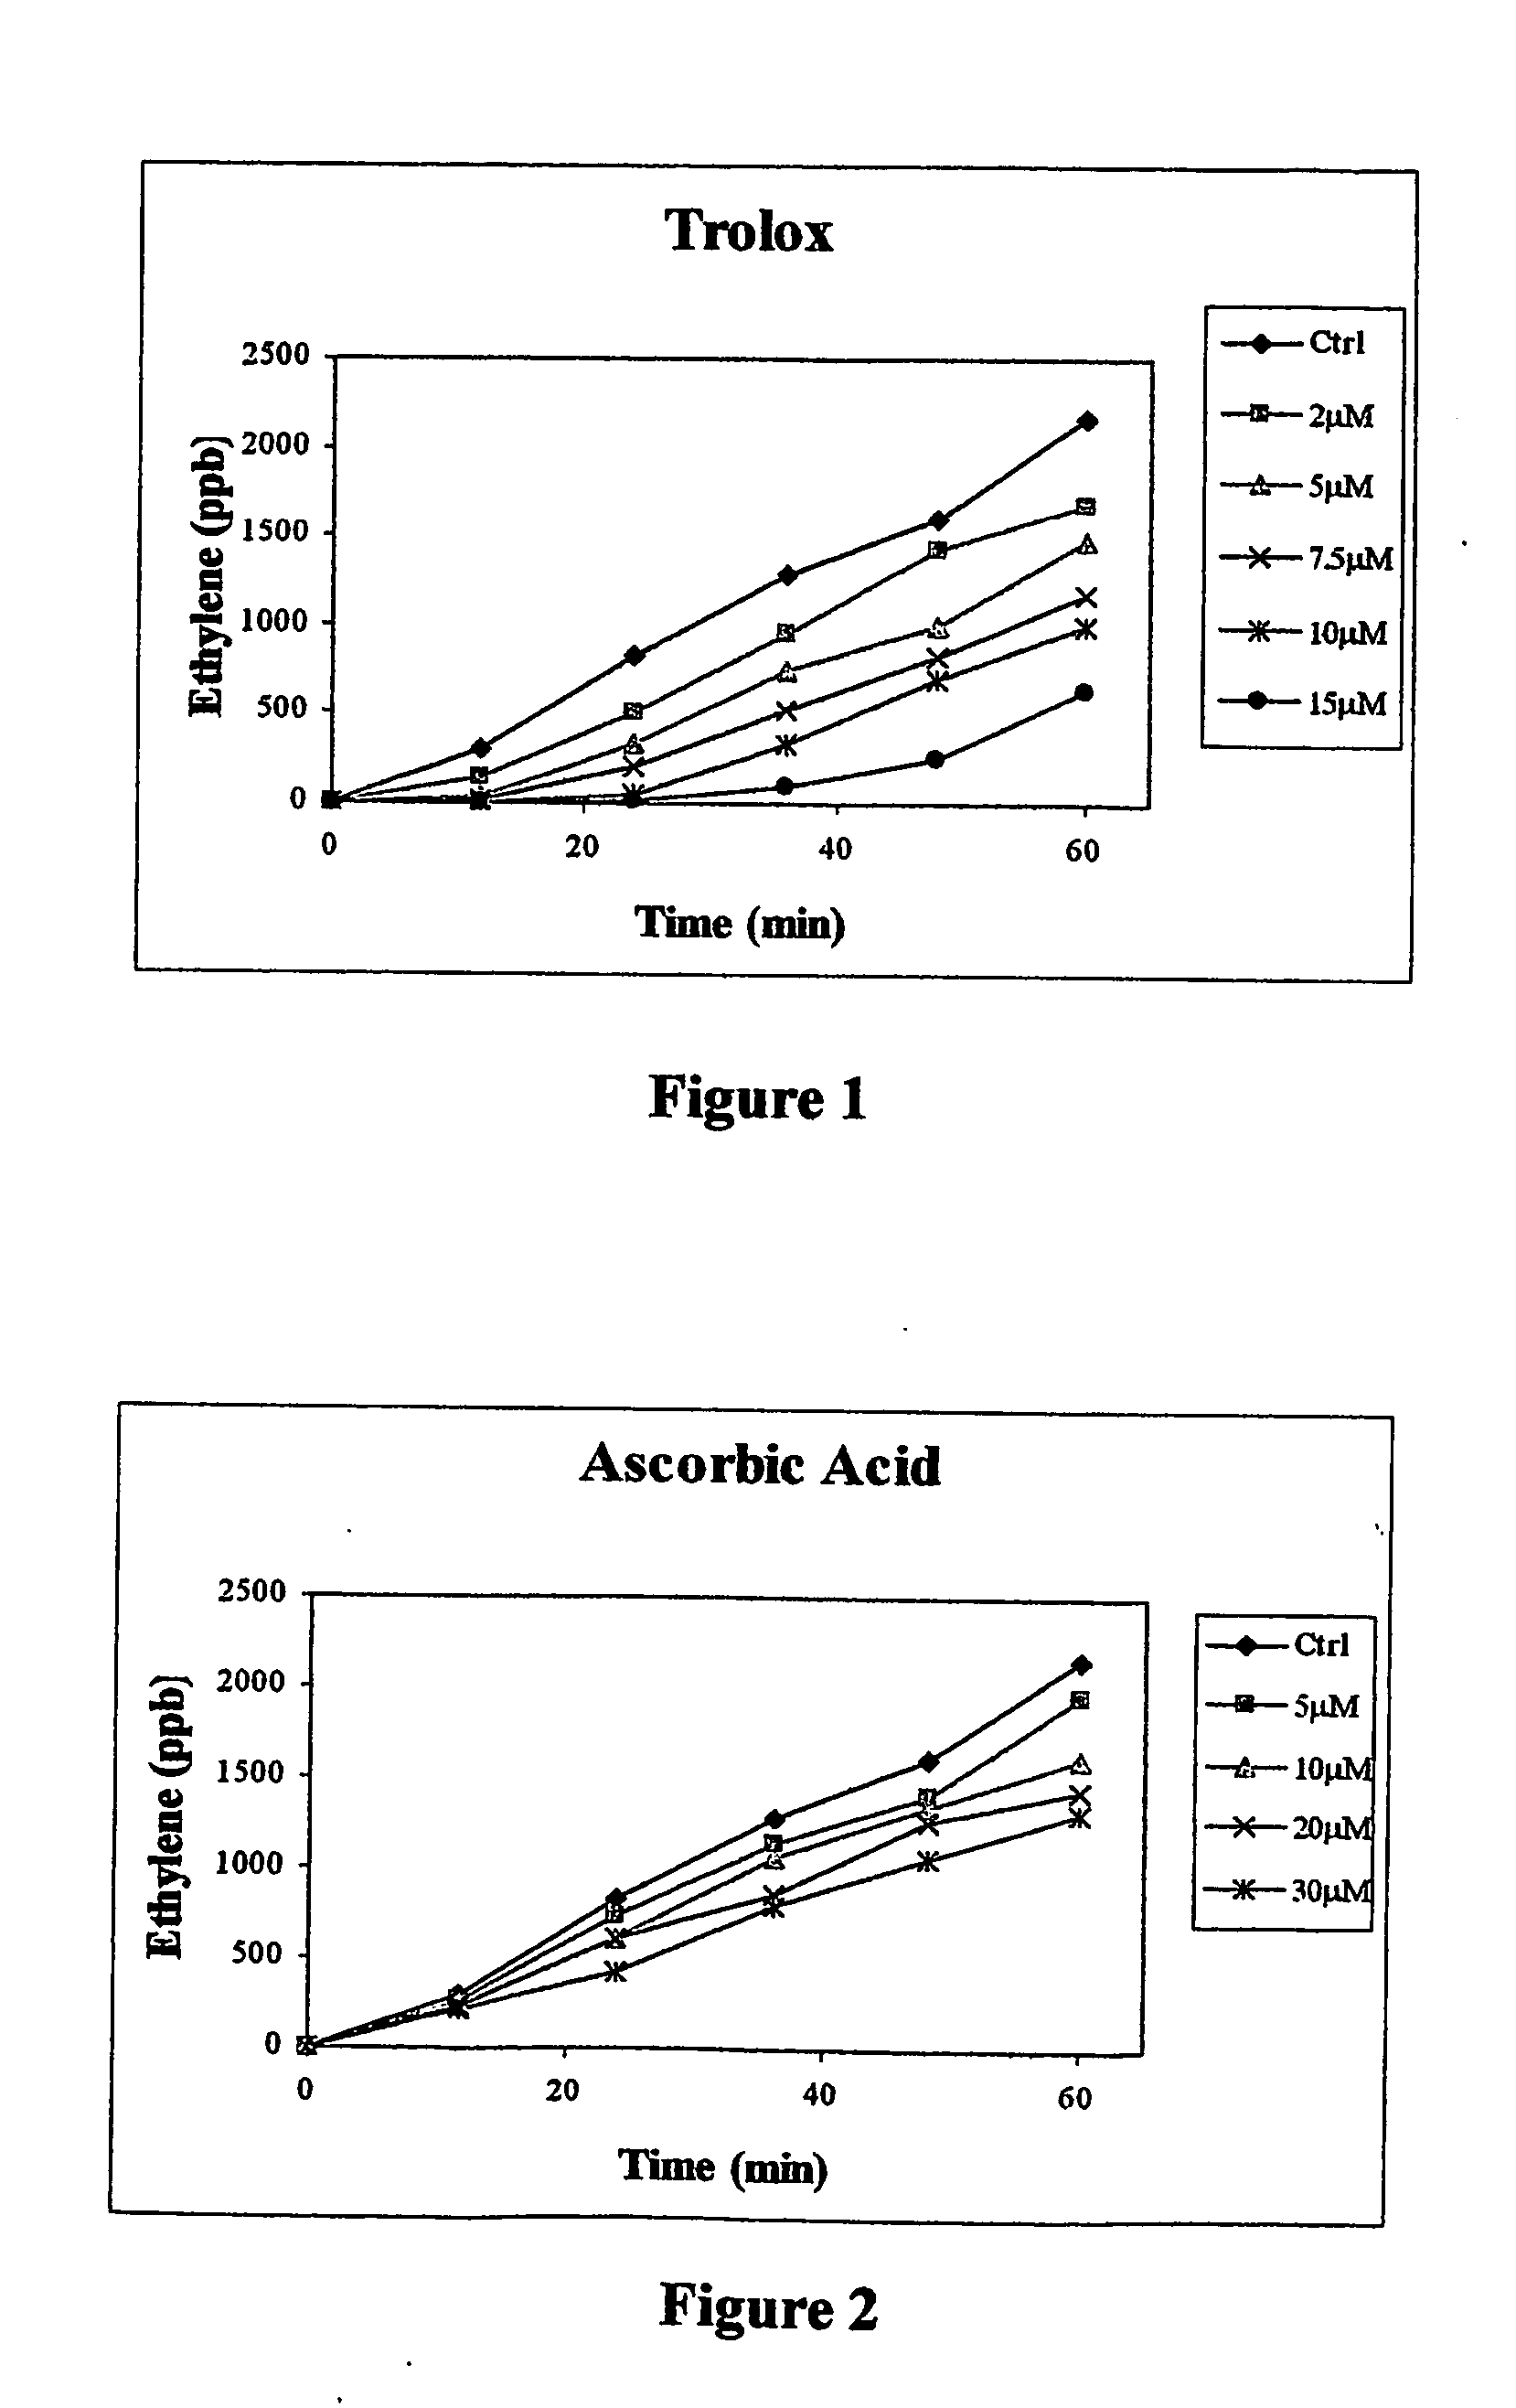 Method of assaying the antioxidant activity of pure compounds, extracts and biological fluids